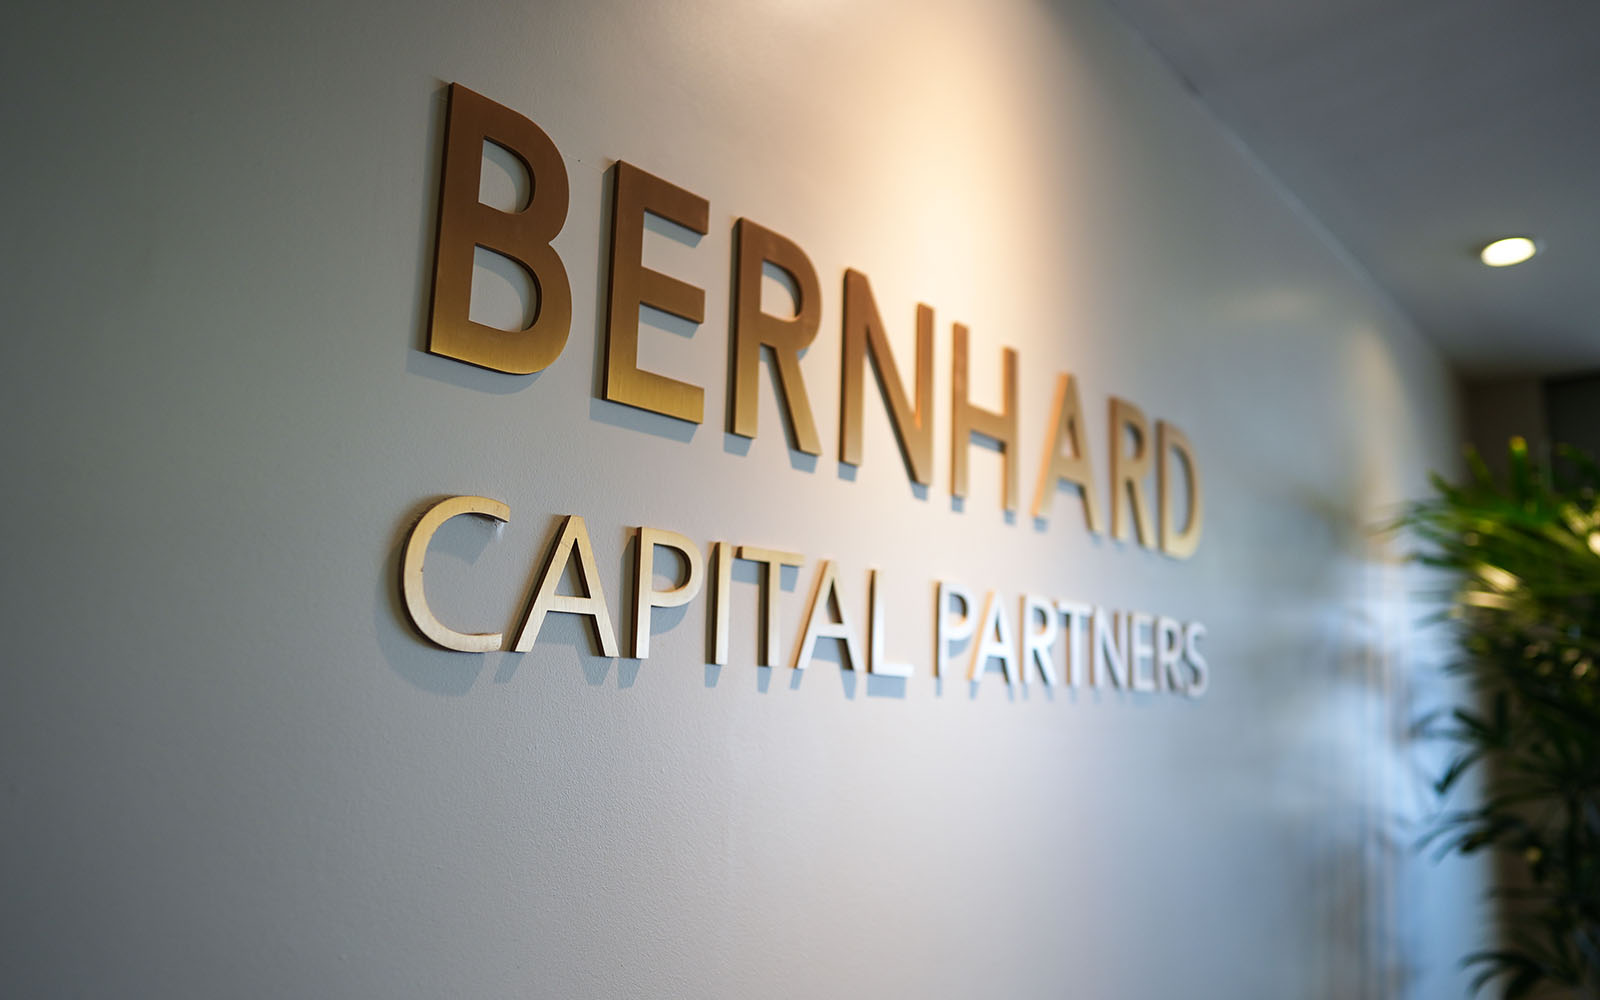 Bernhard Capital Partners Logo on the wall of the entrance of the building.